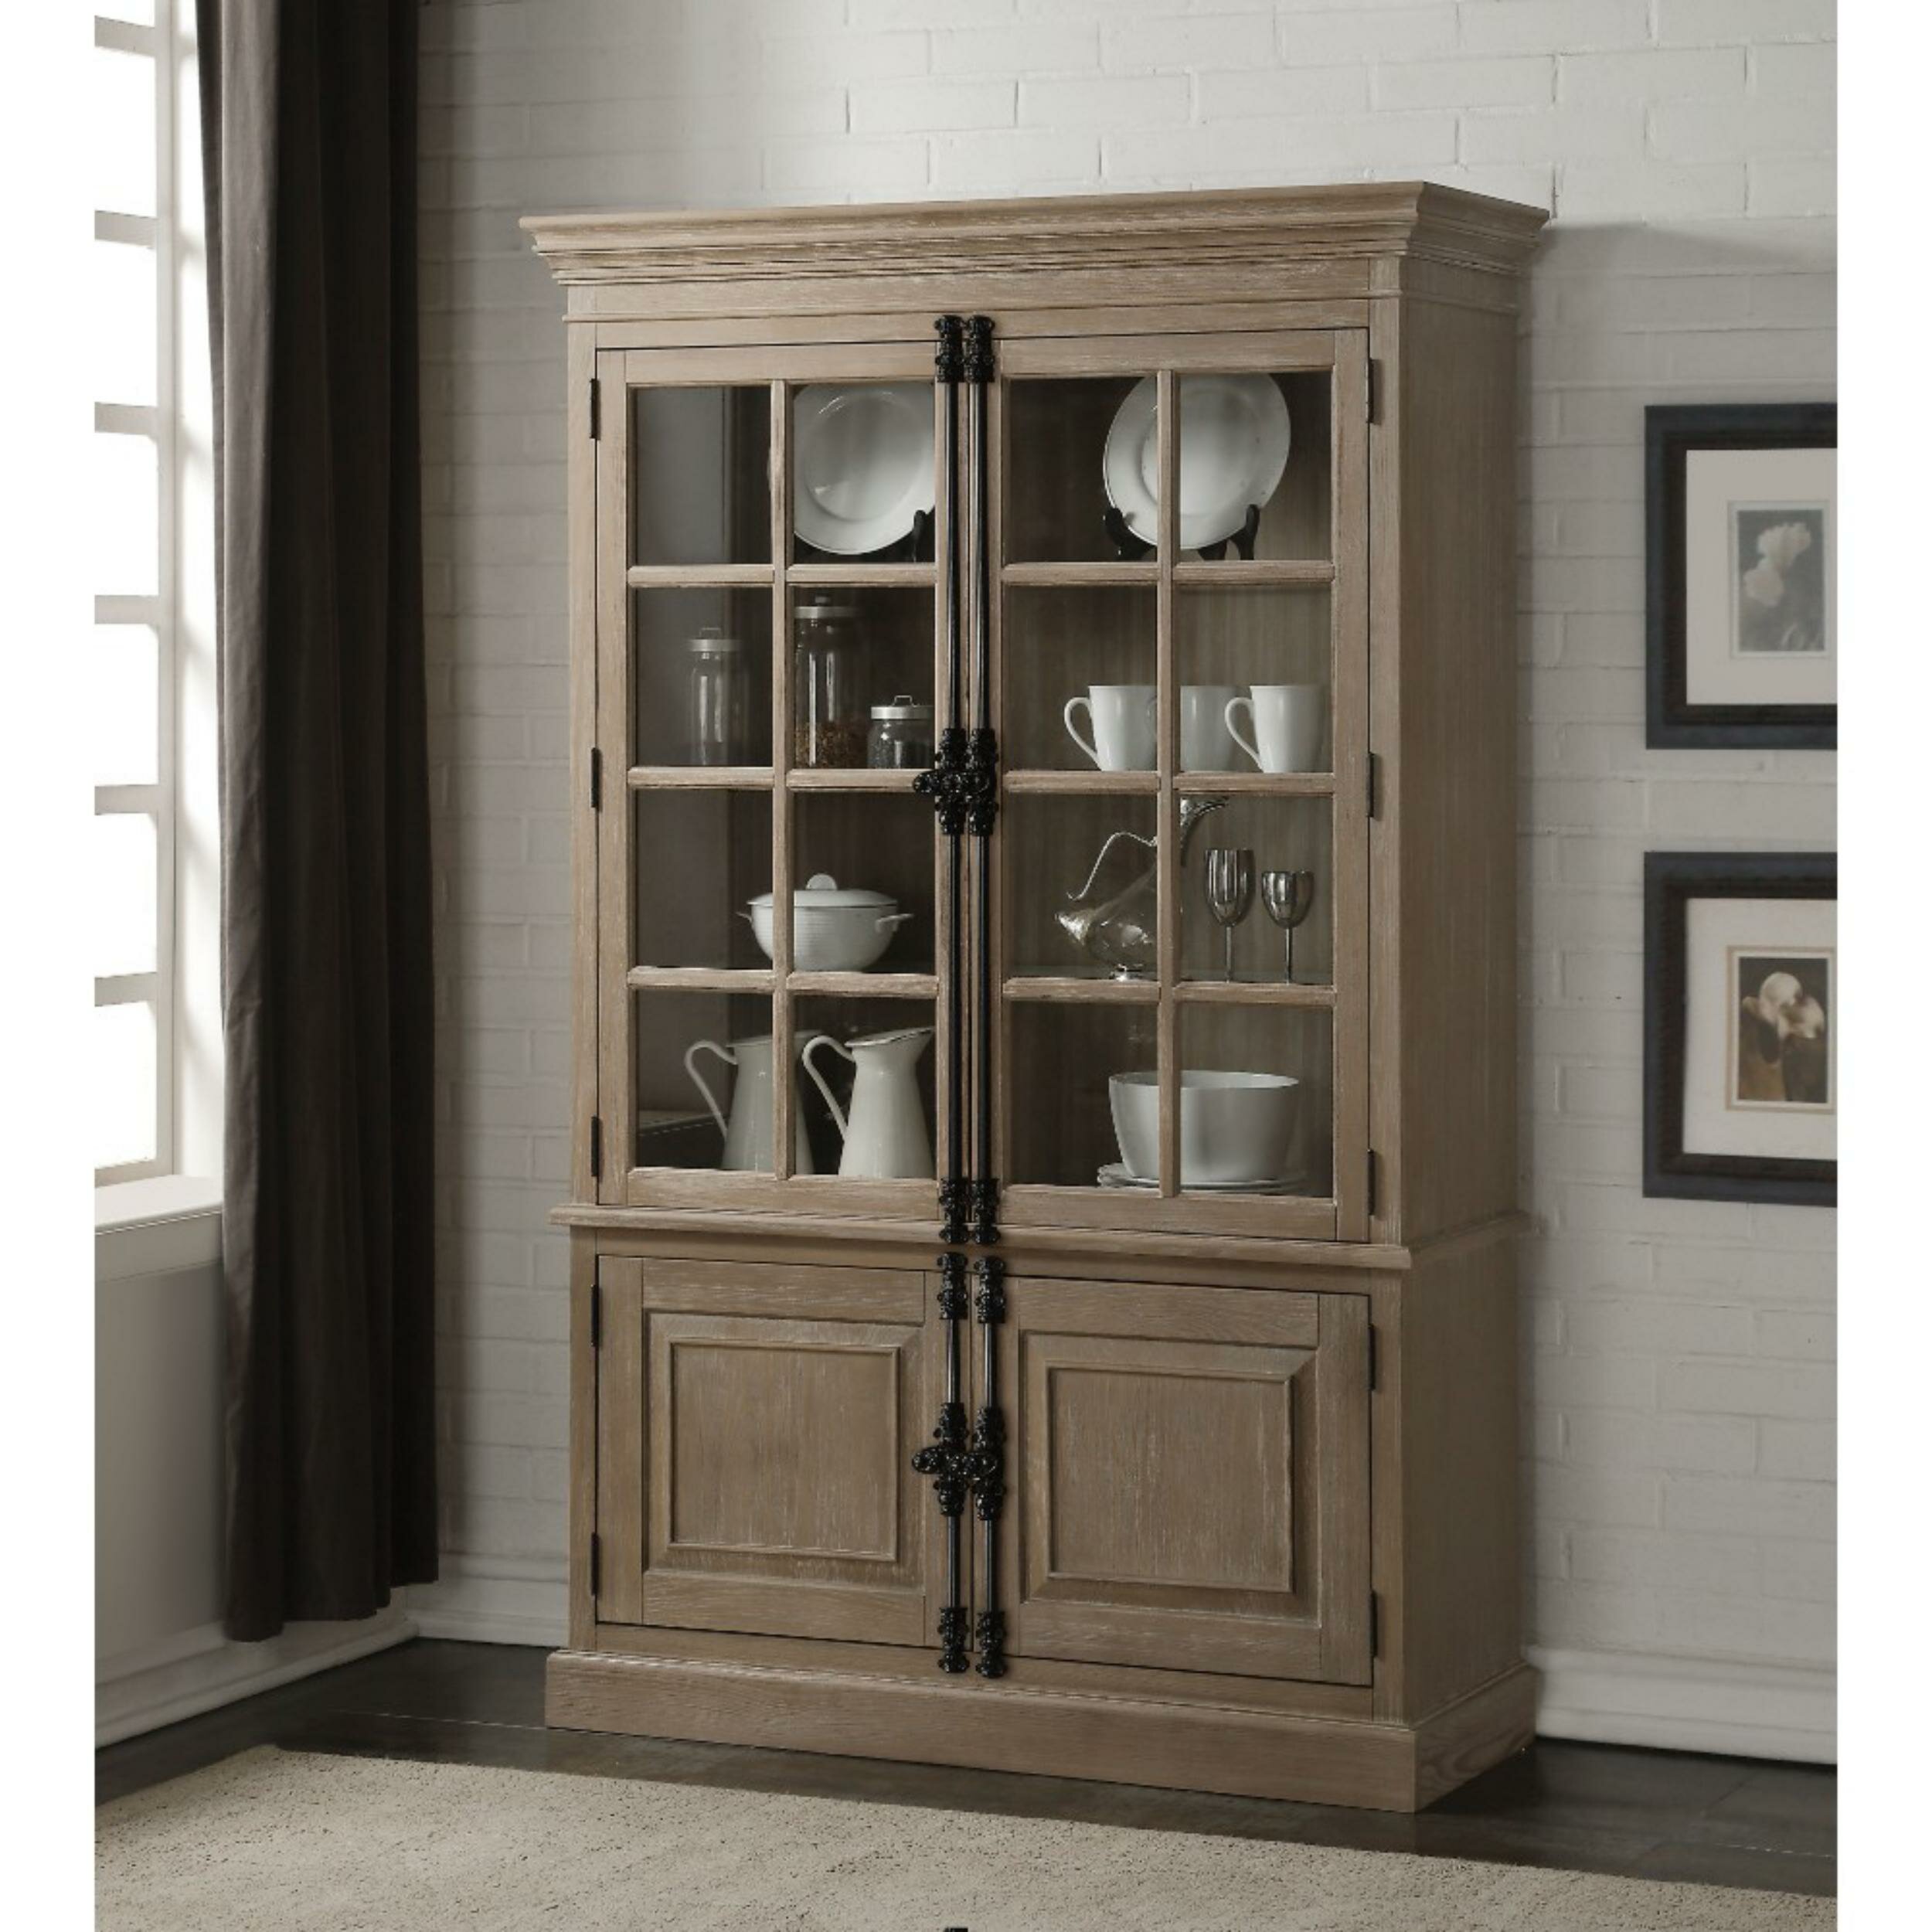 Darby Home Co Frome Wooden China Cabinet Wayfair